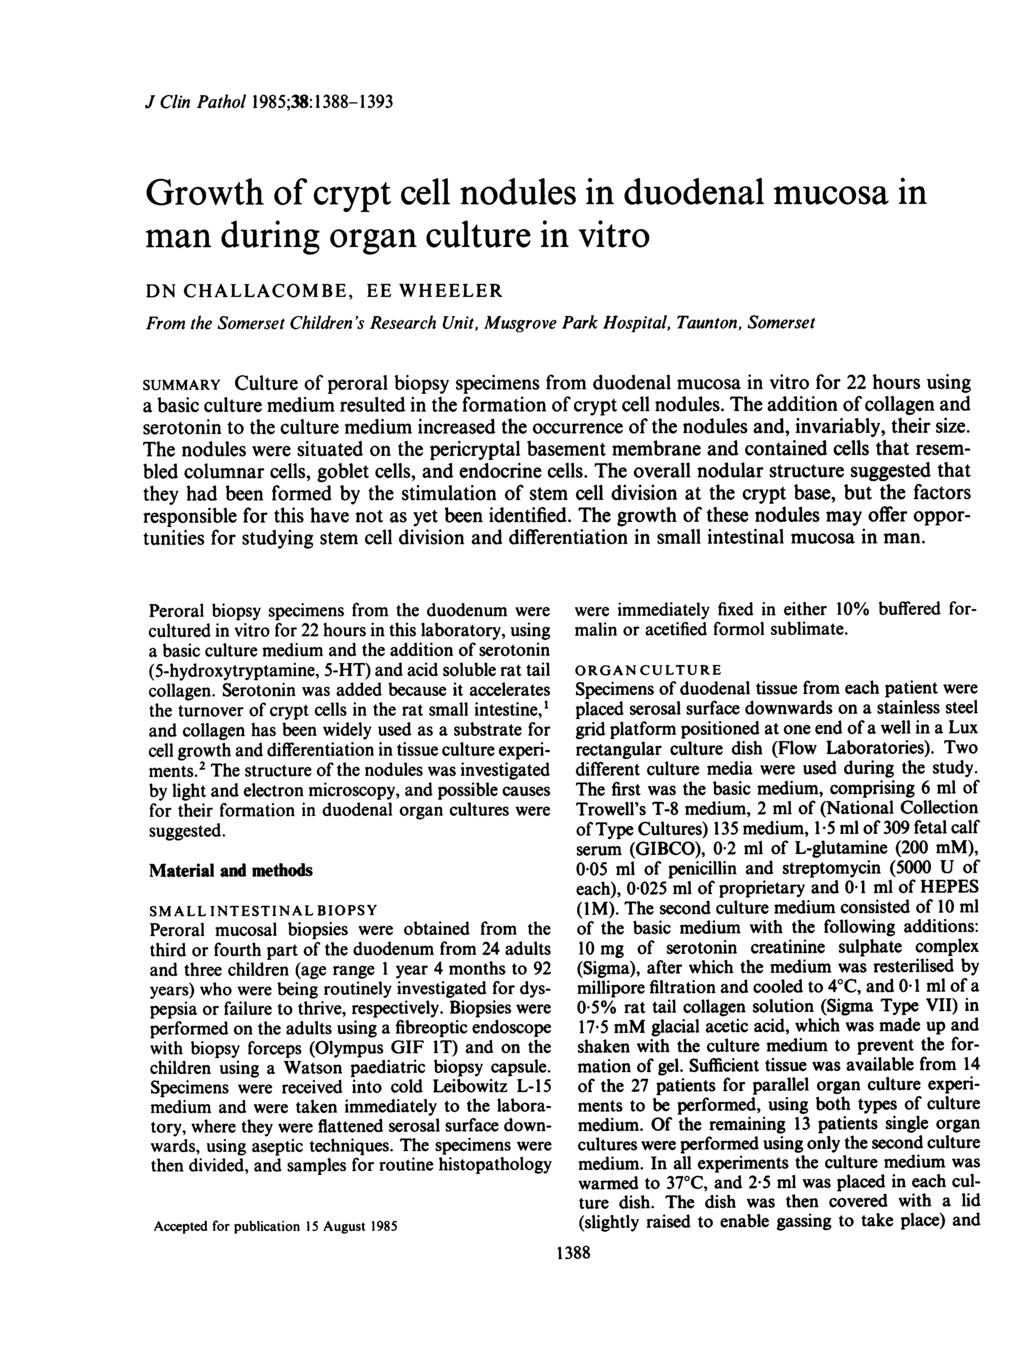 J Clin Pathol 1985;38:1388-1393 Growth of crypt cell nodules in duodenal mucosa in man during organ culture in vitro DN CHALLACOMBE, EE WHEELER From the Somerset Children's Research Unit, Musgrove